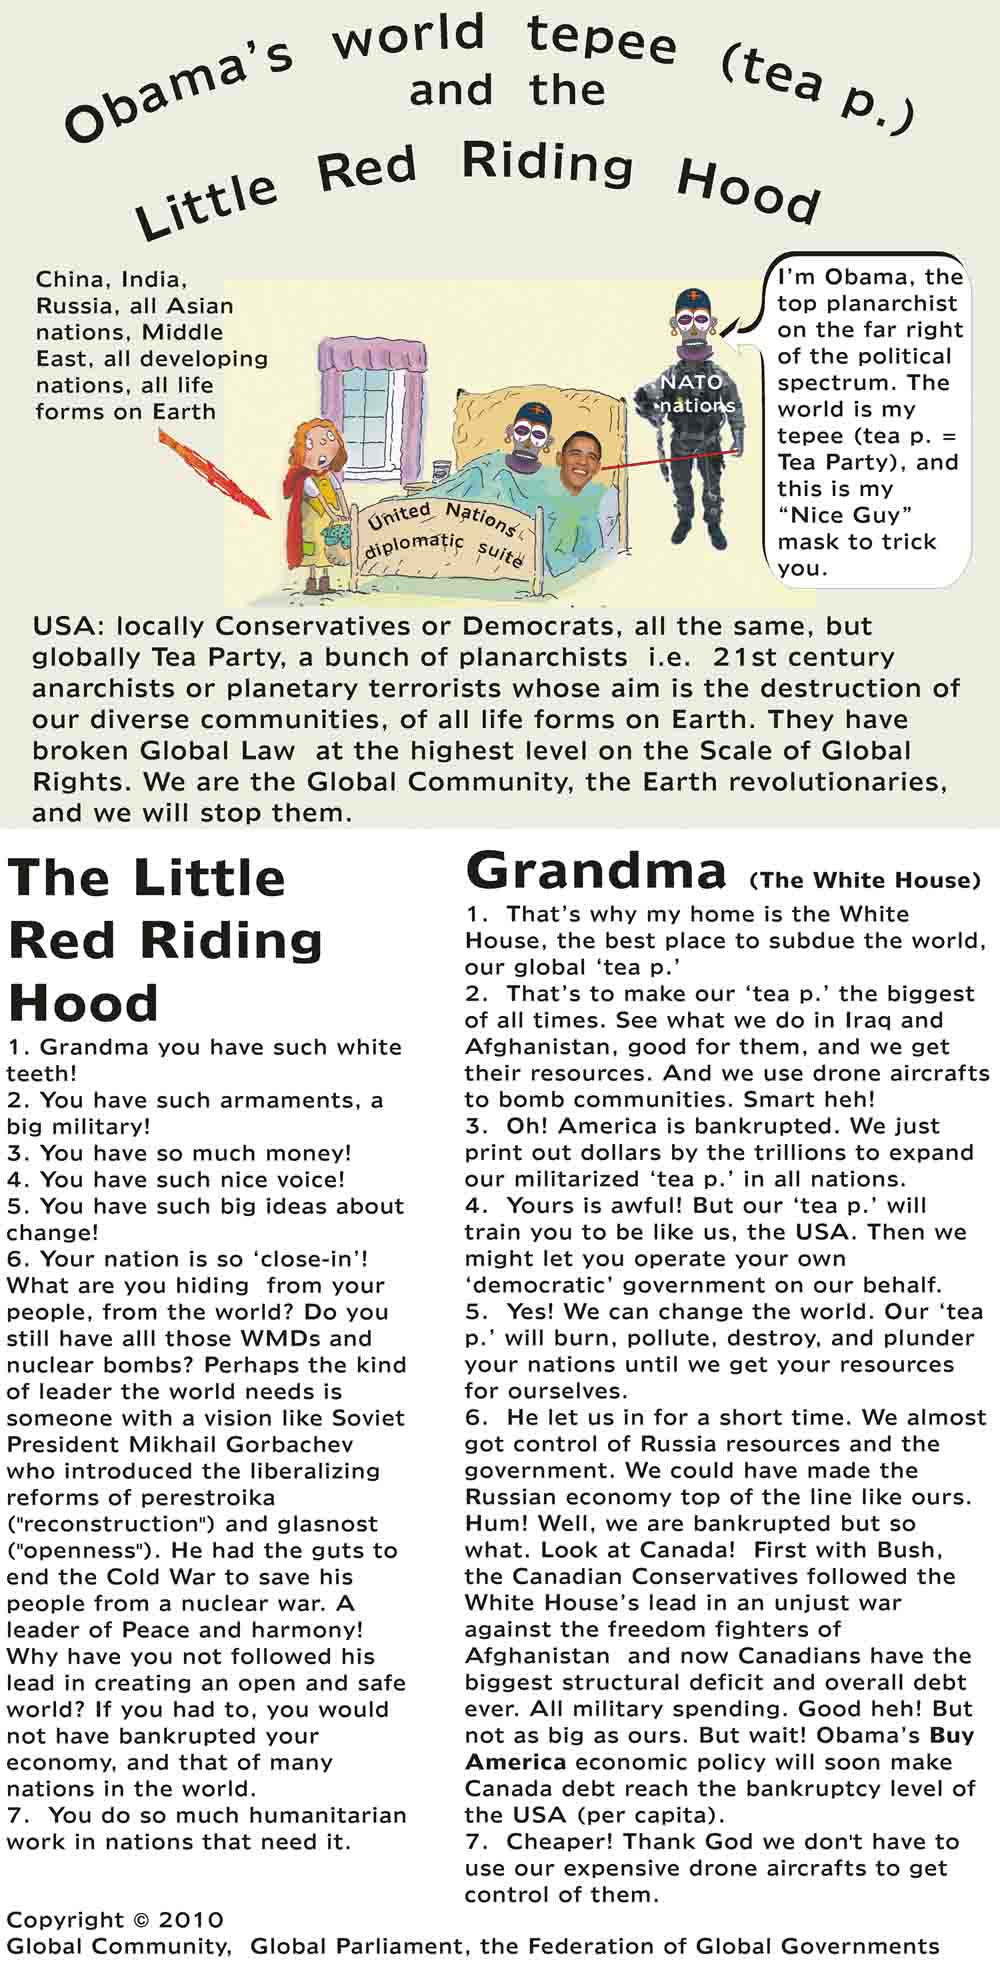 Obama s  world  tepee  (tea p. - Tea Party) and the  Little  Red  Riding  Hood